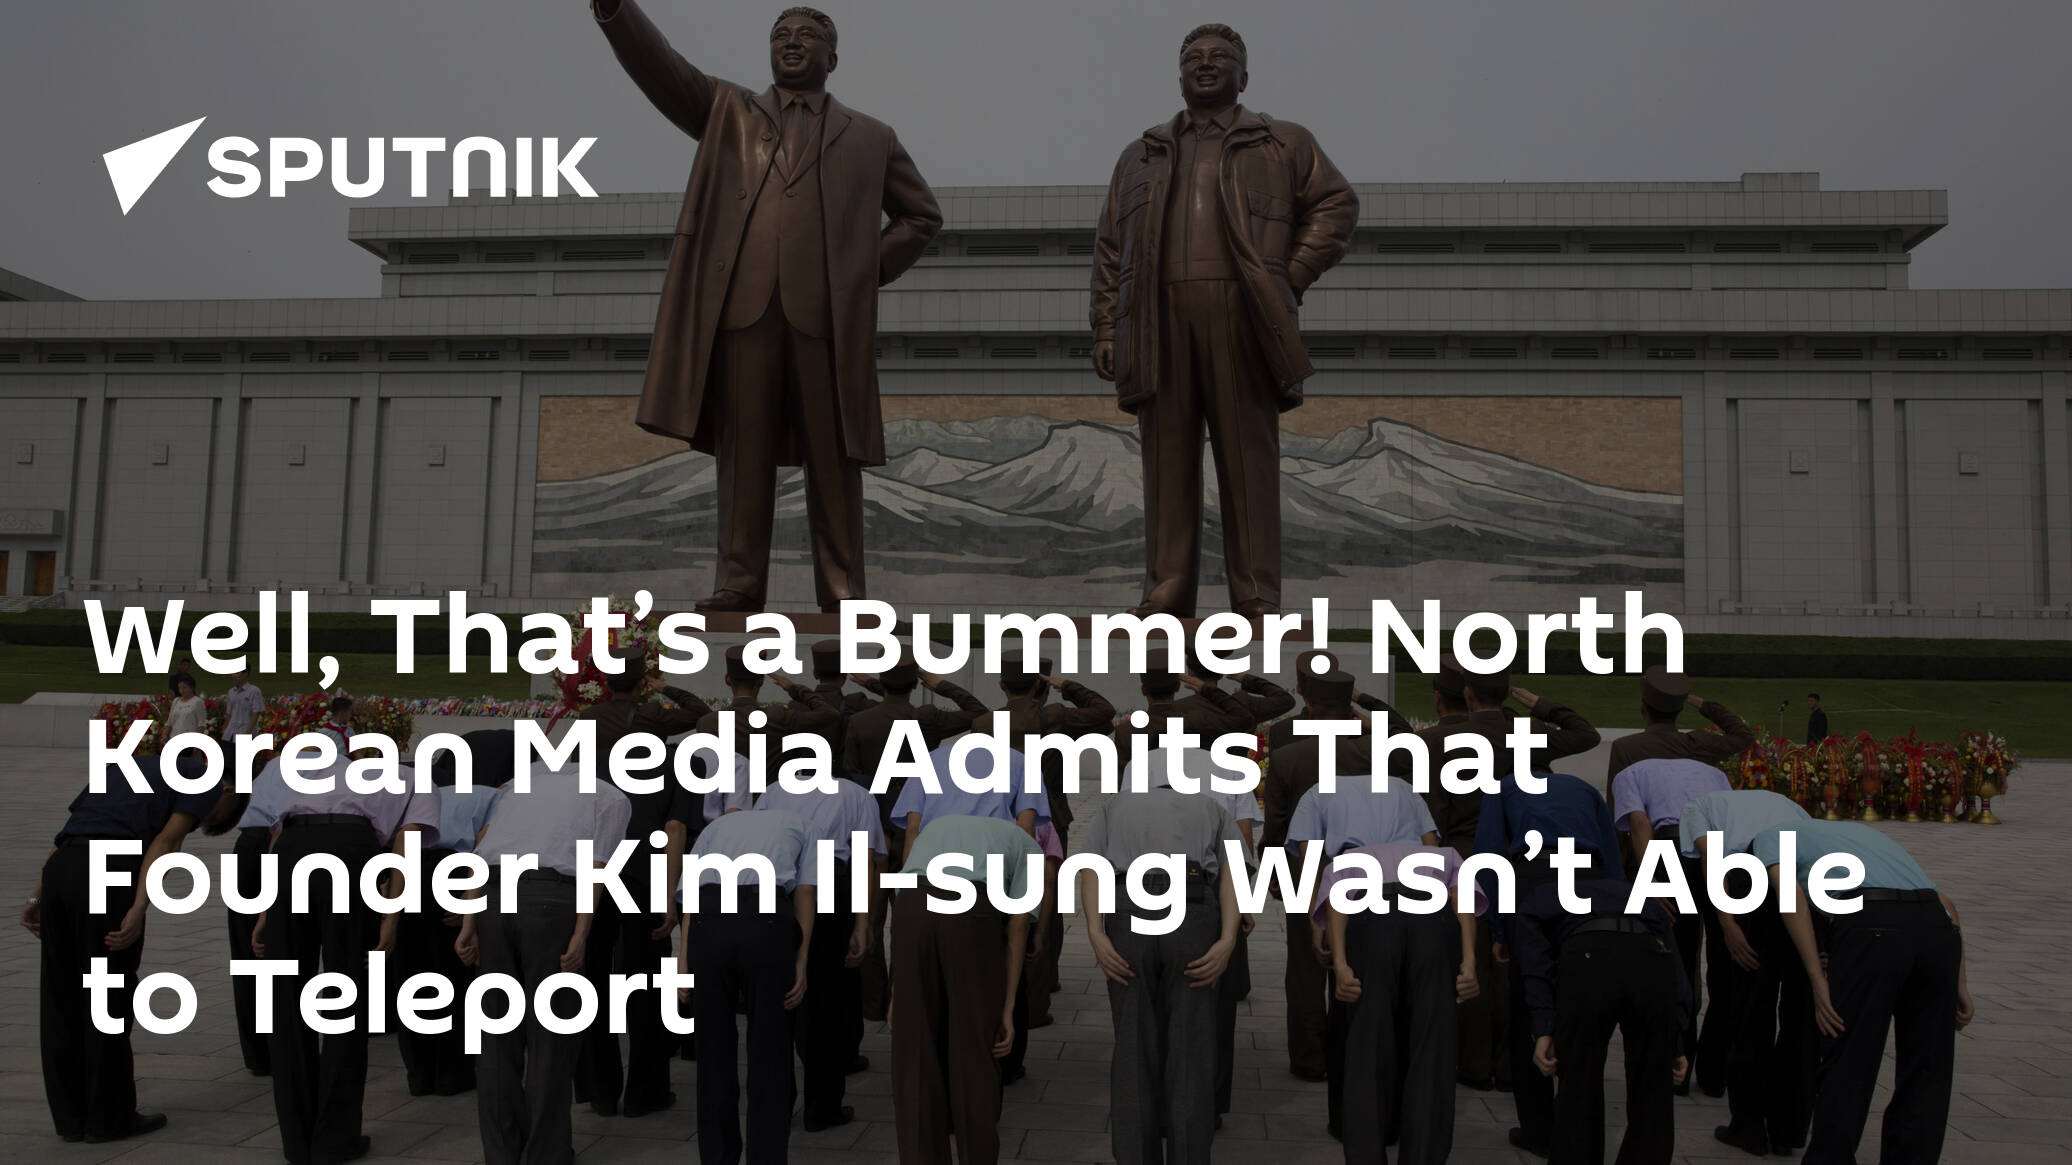 Well, That's a Bummer! North Korean Media Admits That Founder Kim Il-sung  Wasn't Able to Teleport - 23.05.2020, Sputnik International